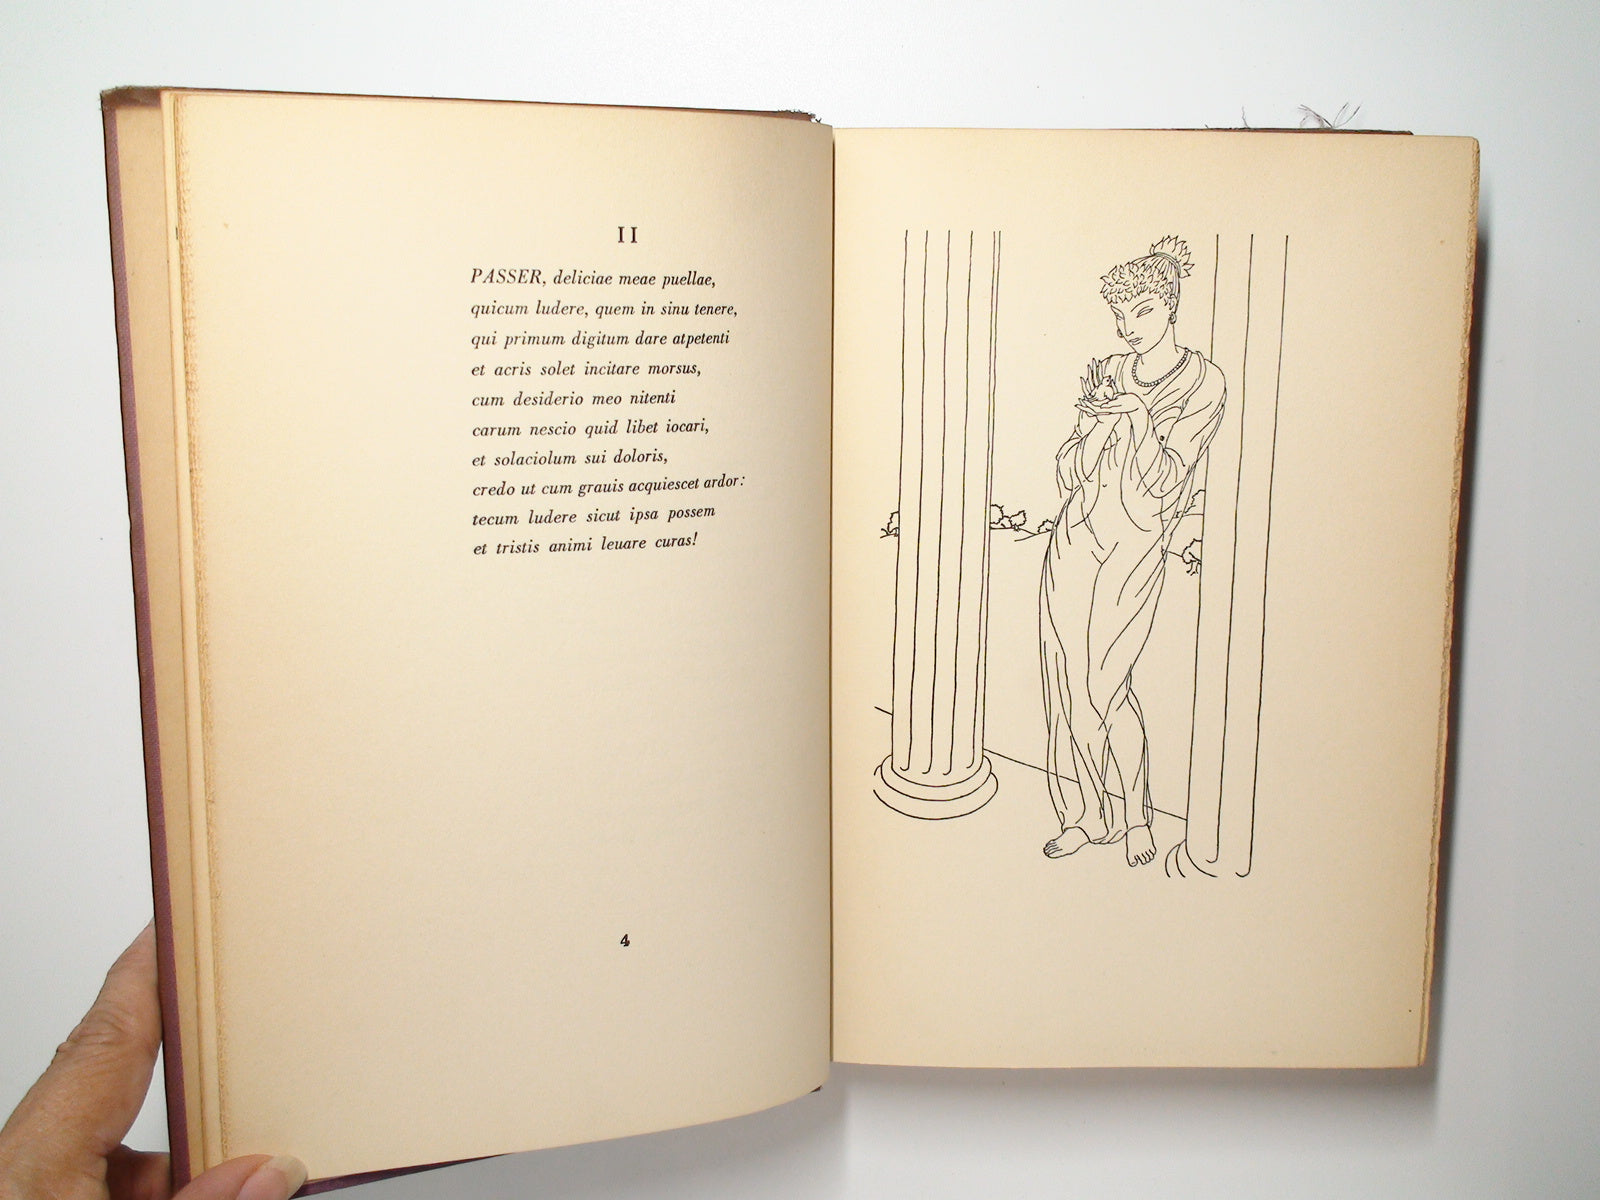 The Poems of Catullus, Translated by Horace Gregory, Illustrated, 1933